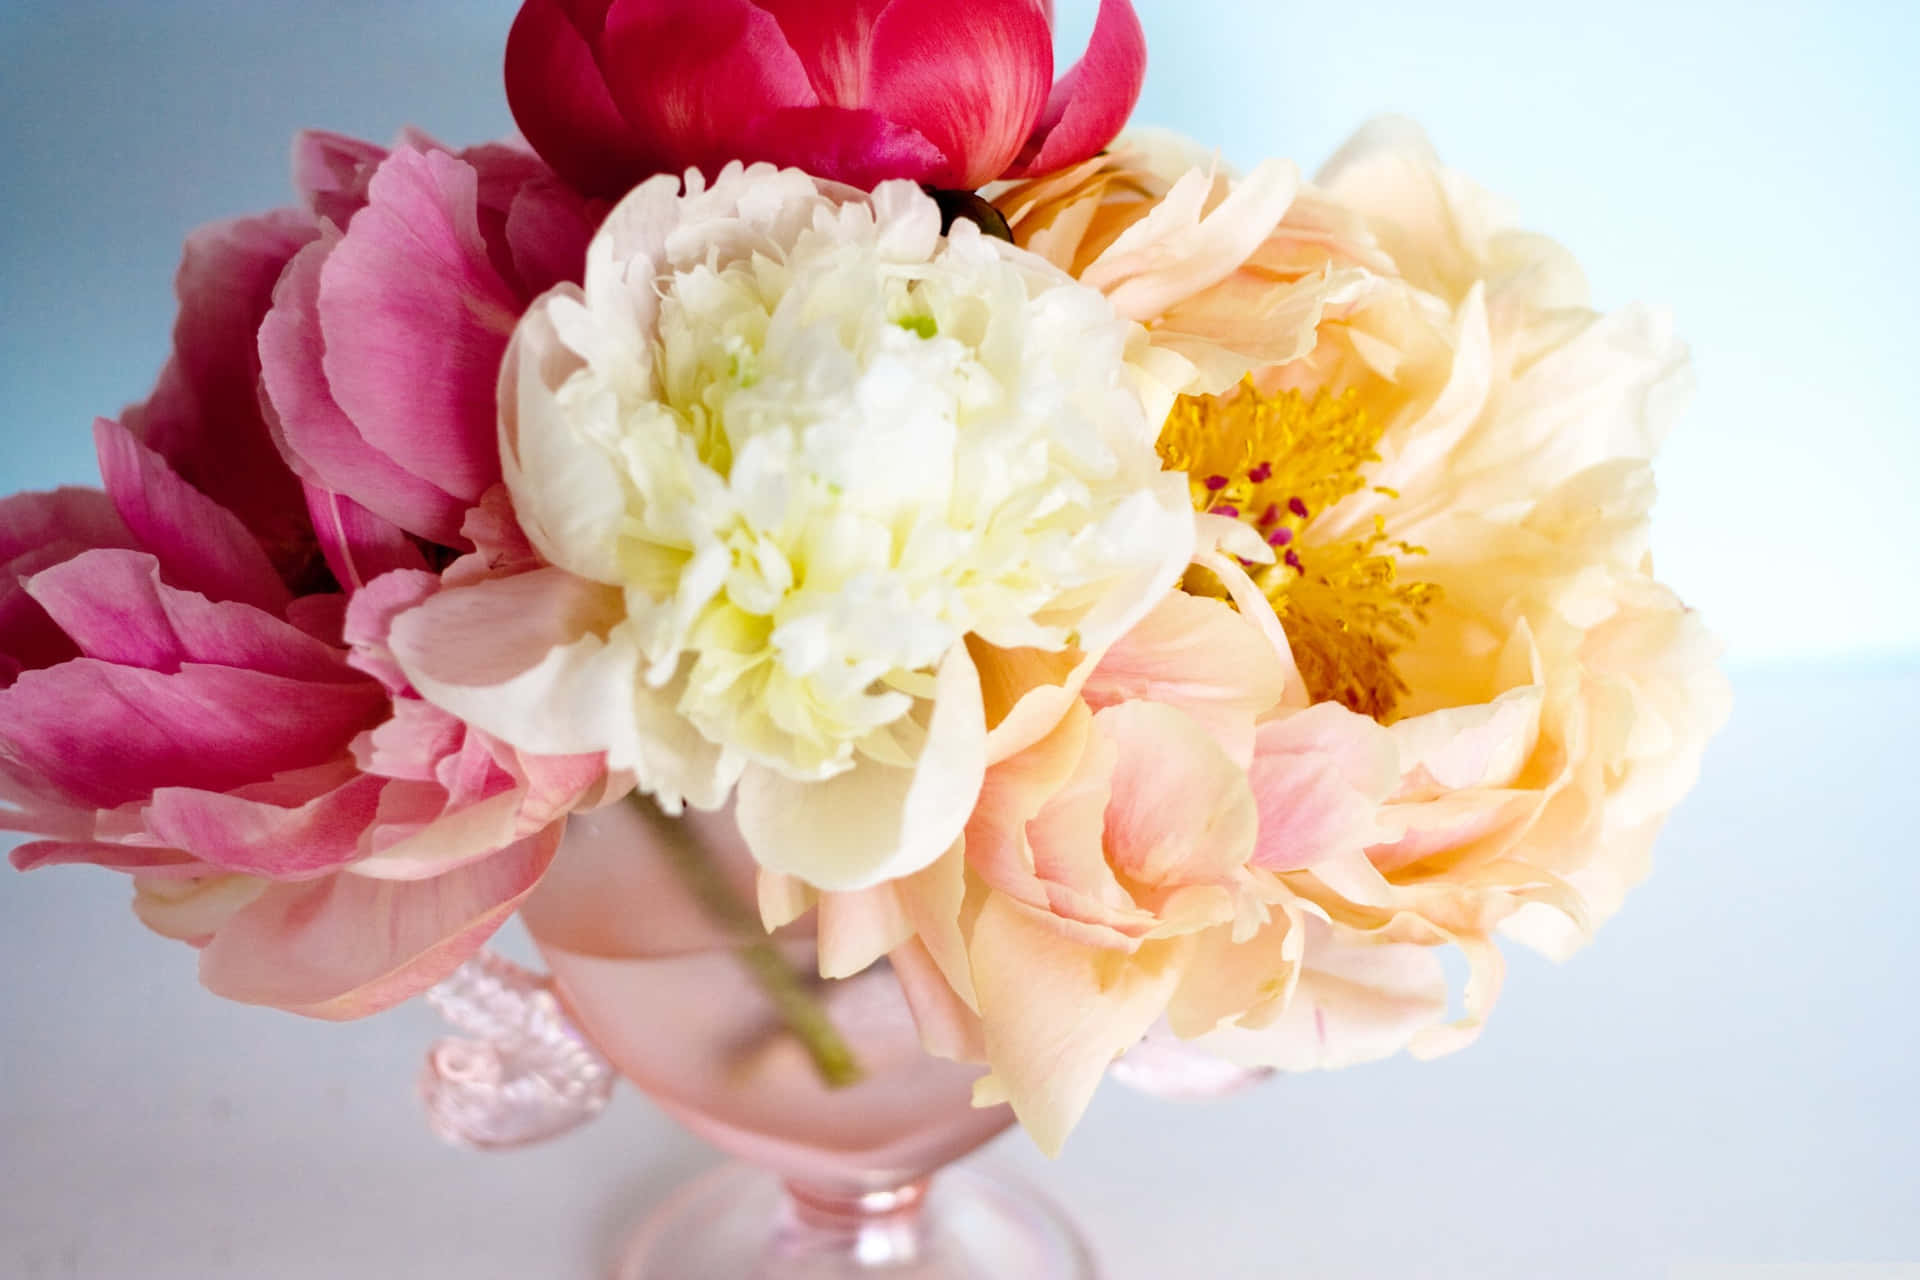 Celebrate spring with beautiful pink peonies